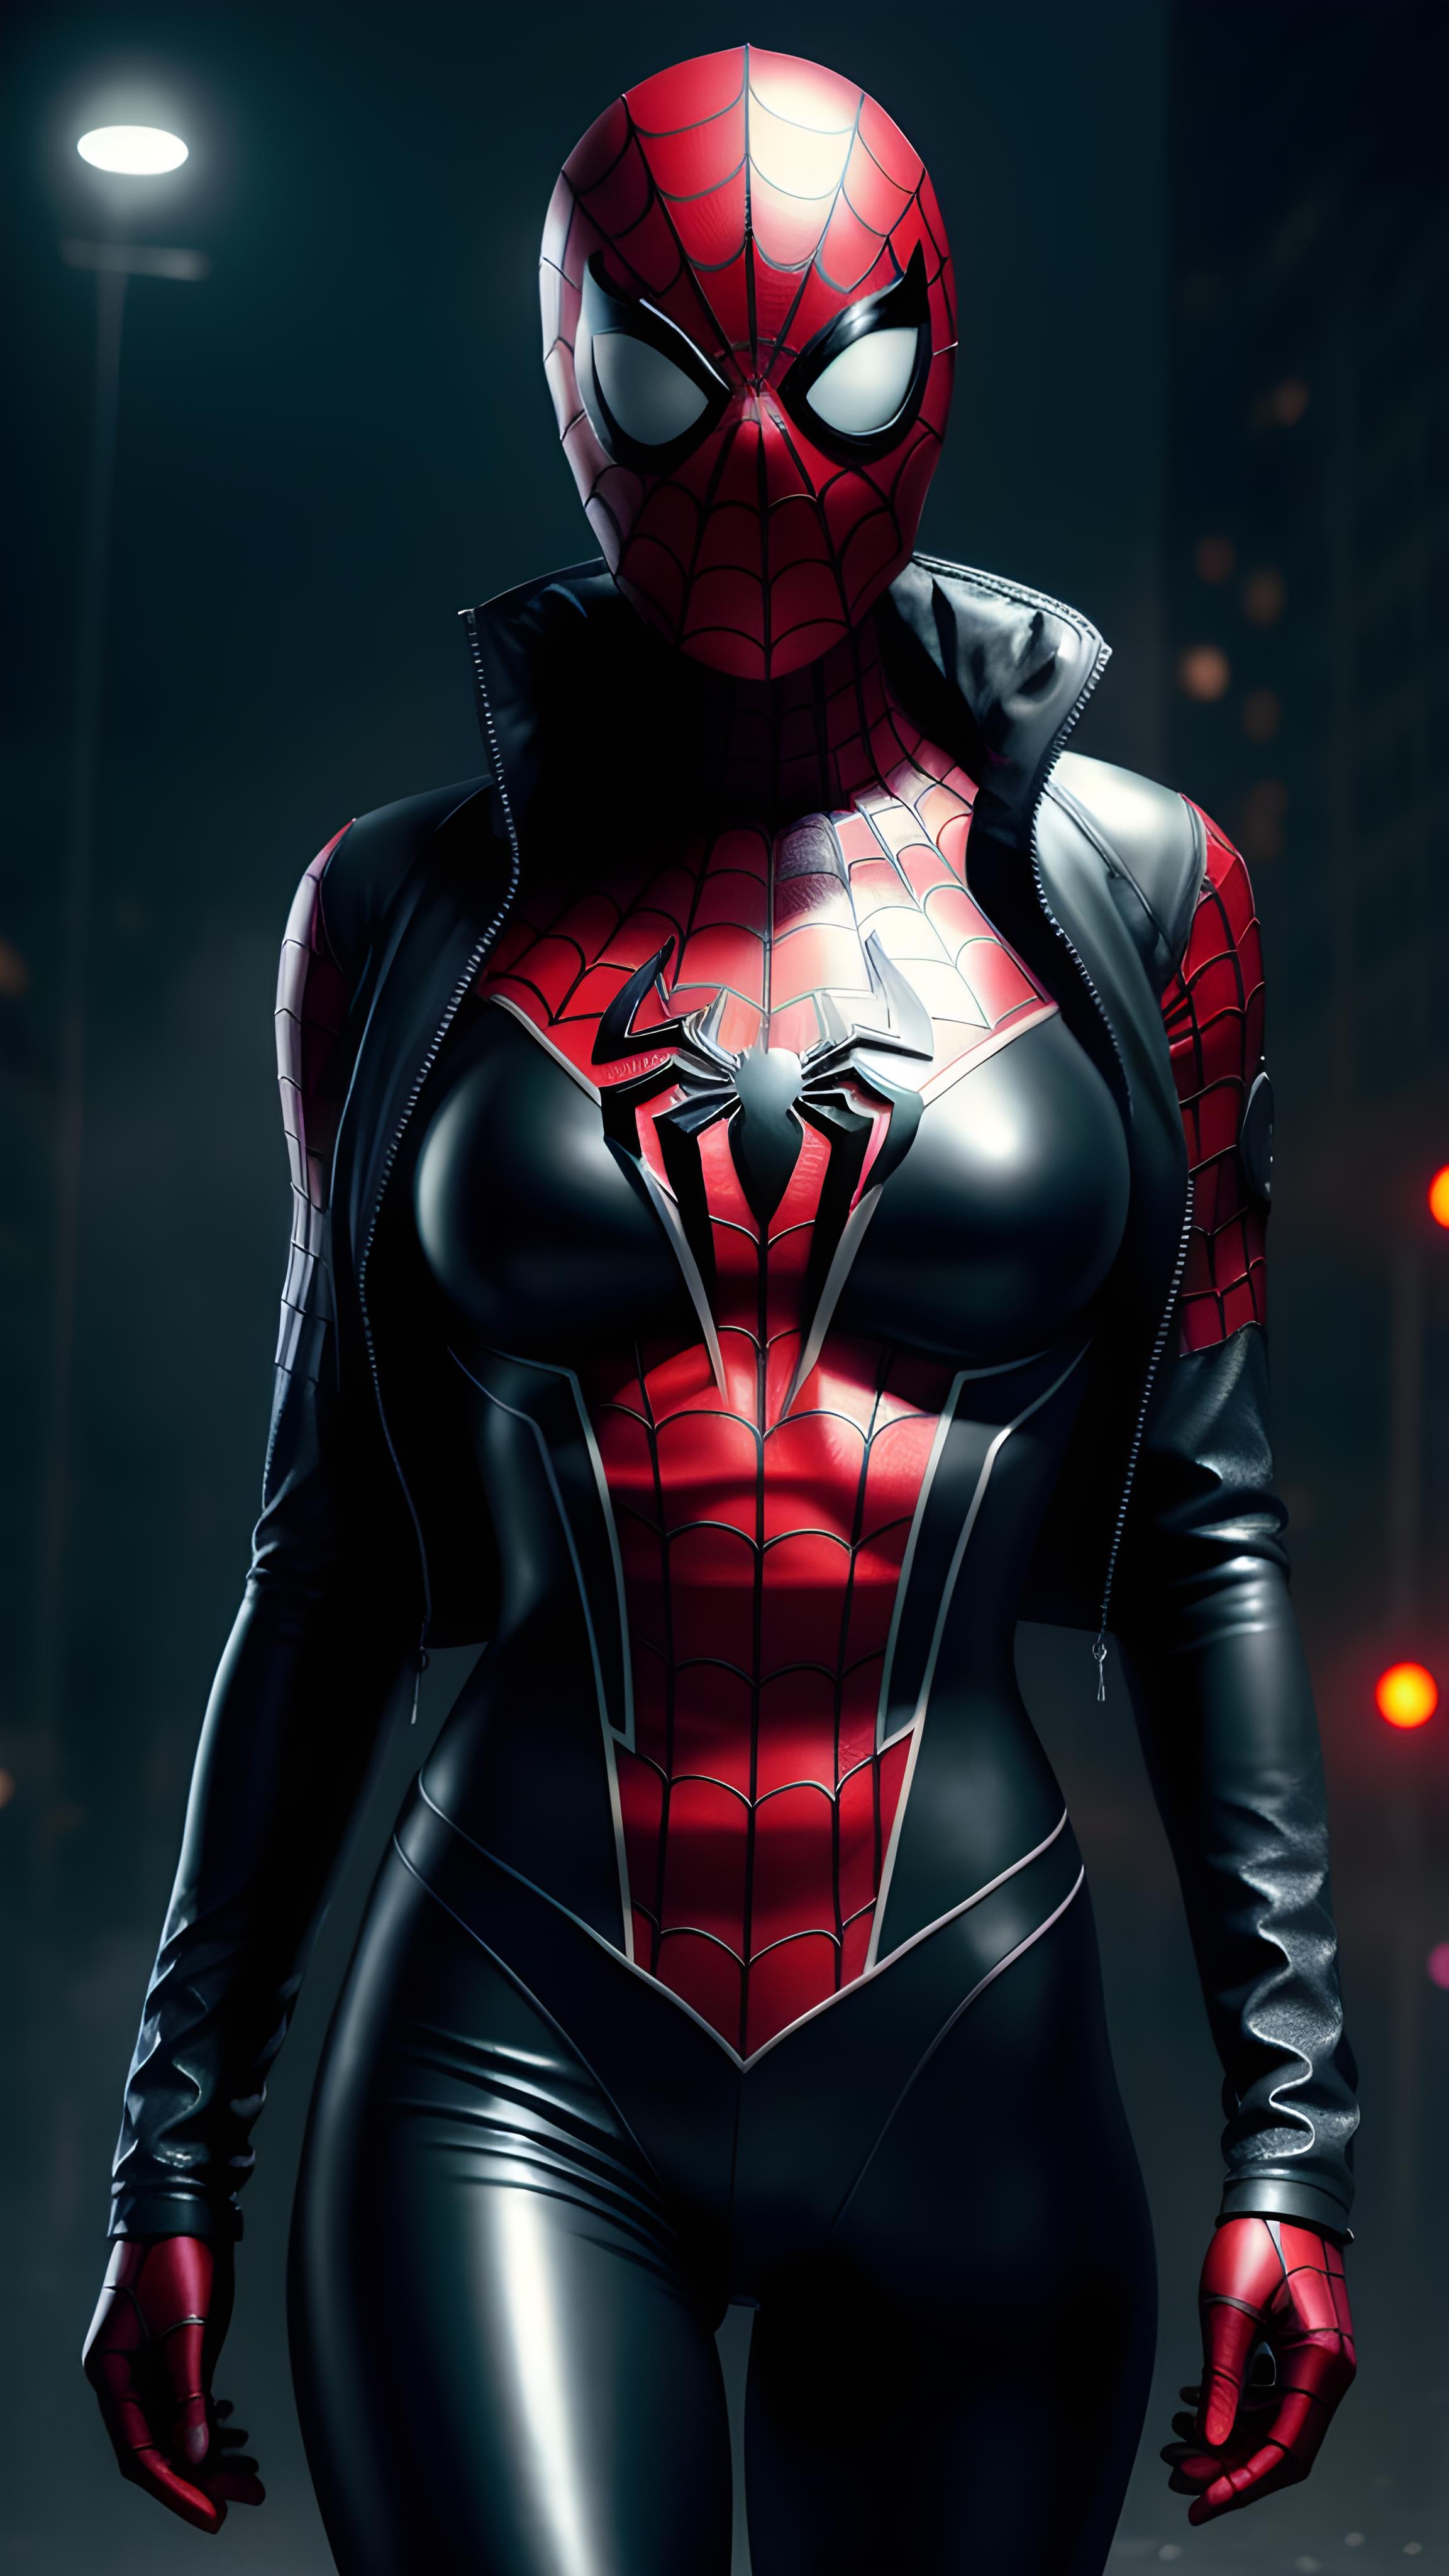 Black and Red Spiderman Suit on a Woman